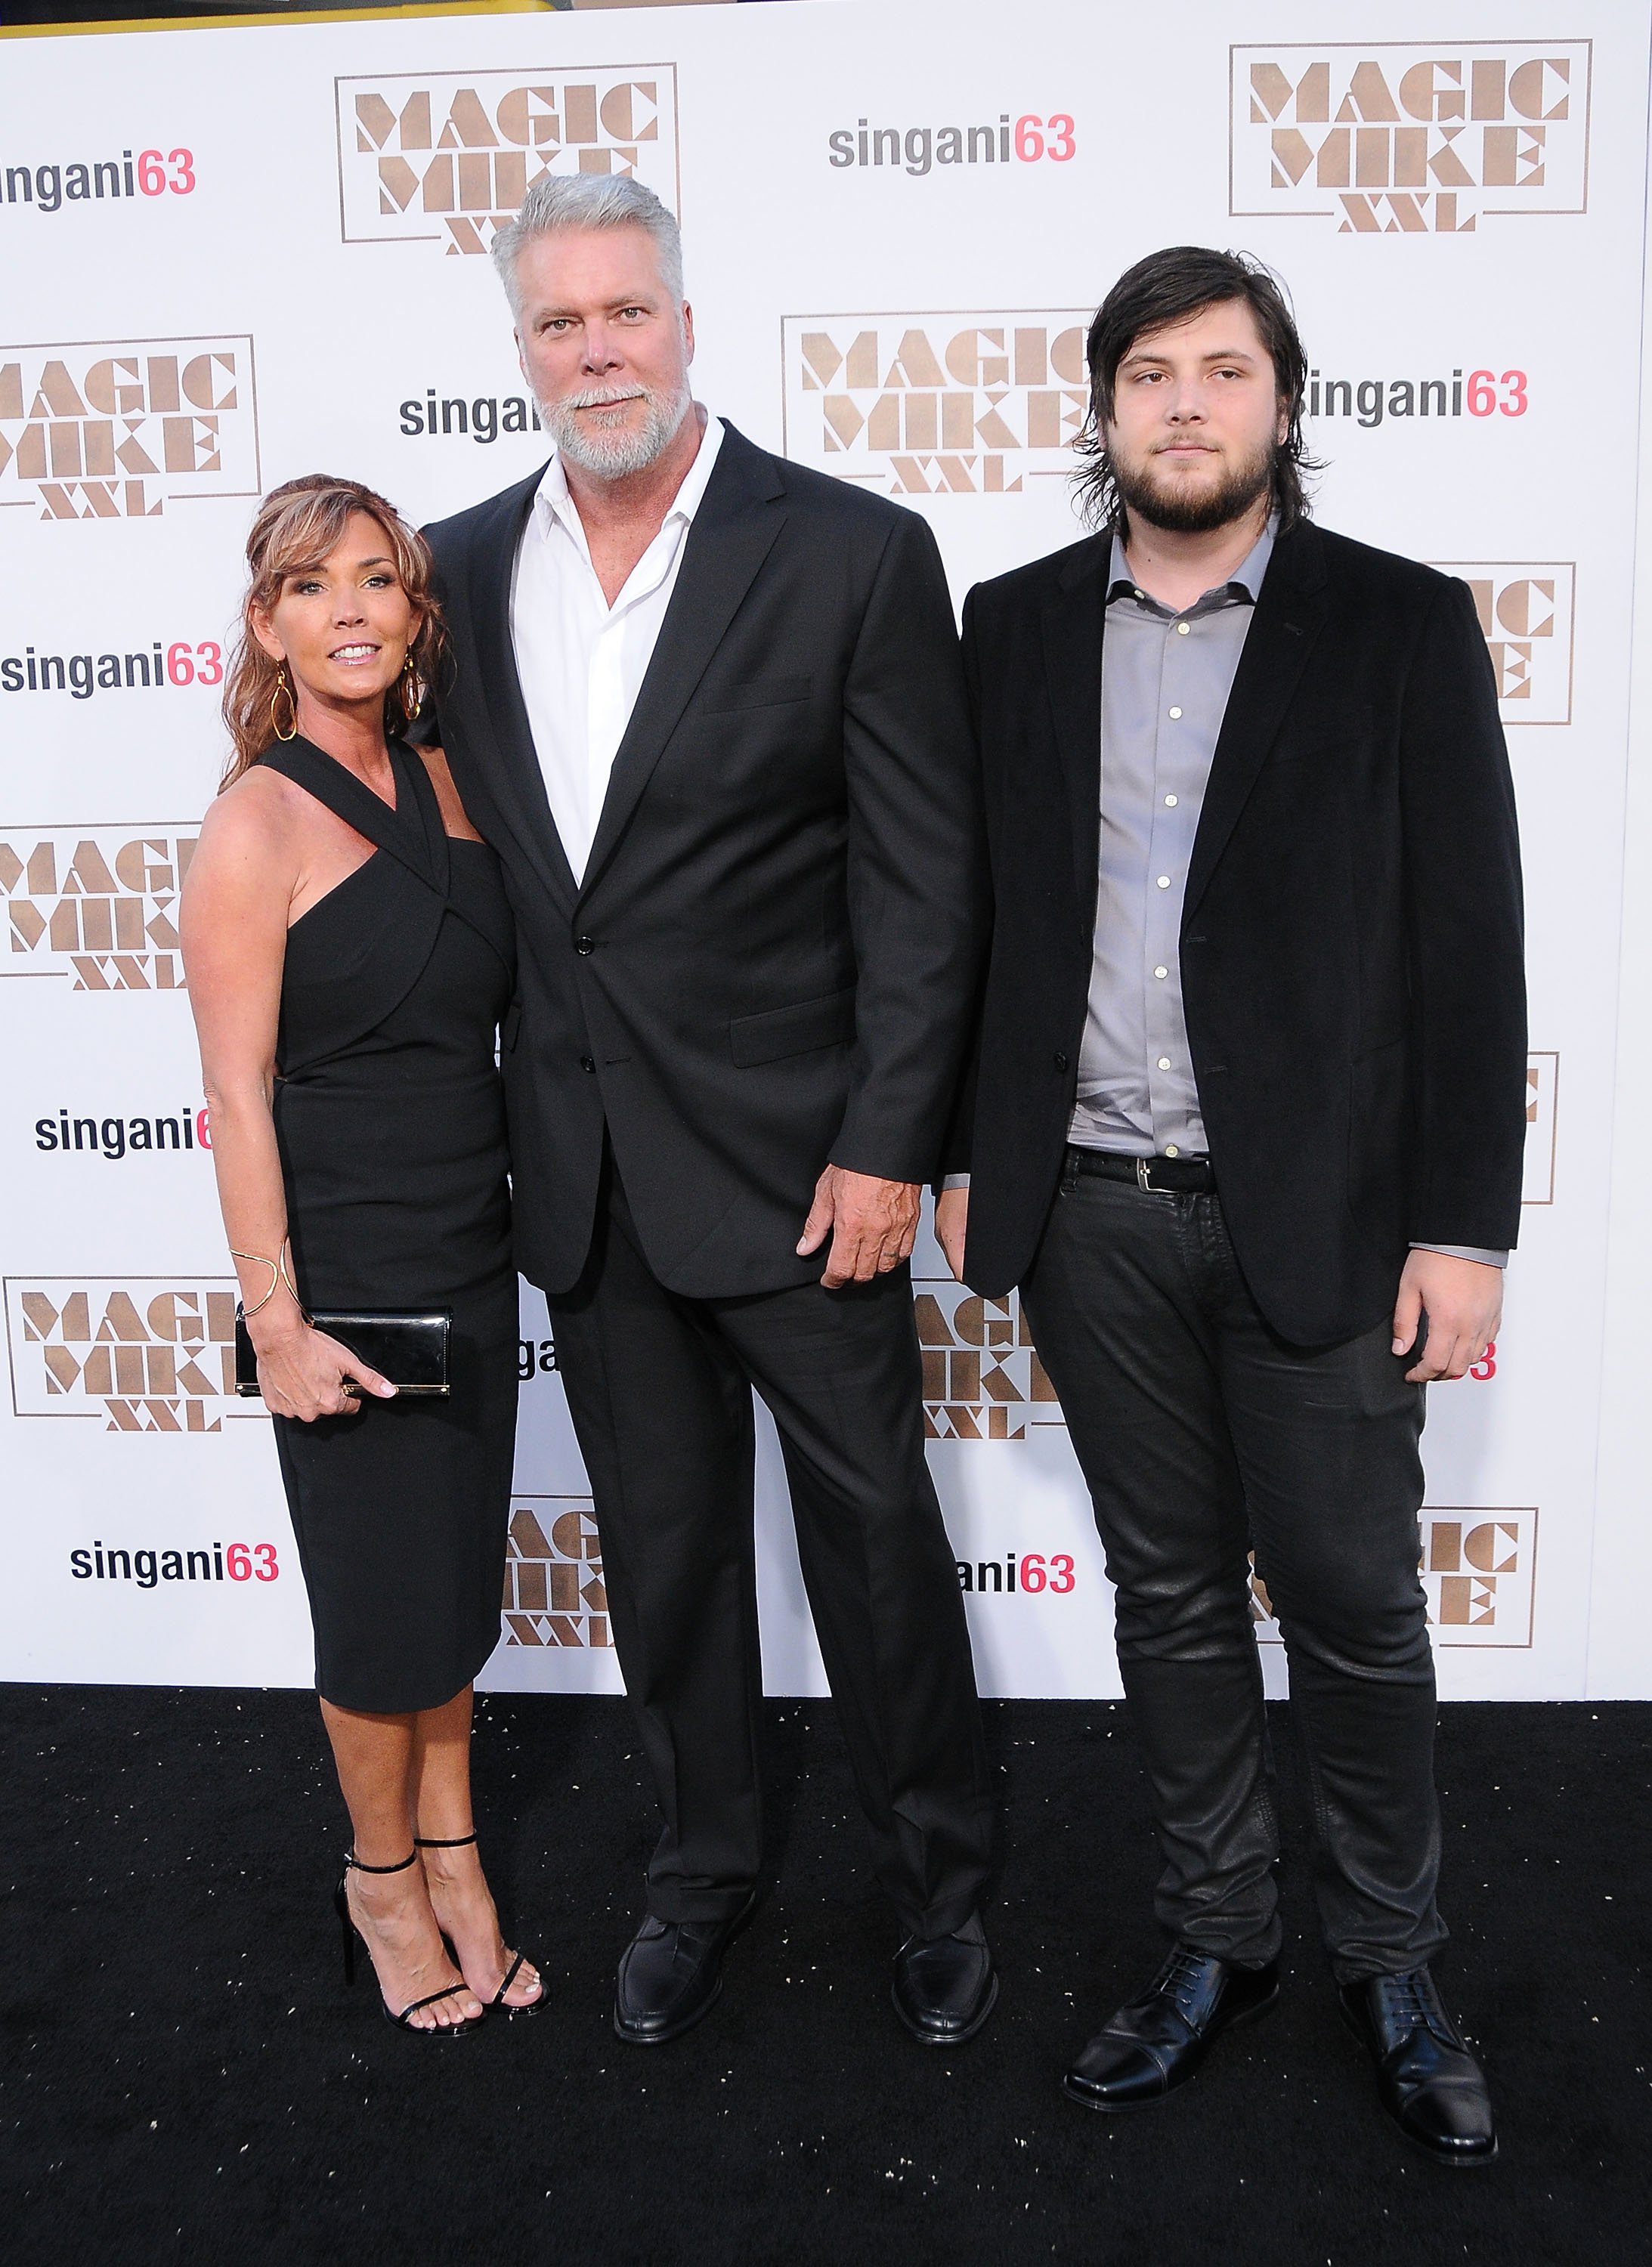 Tamara Nash, Kevin Nash, and Tristen Nash at the Los Angeles World Premiere of "Magic Mike XXL" on June 25, 2015 | Source: Getty Images